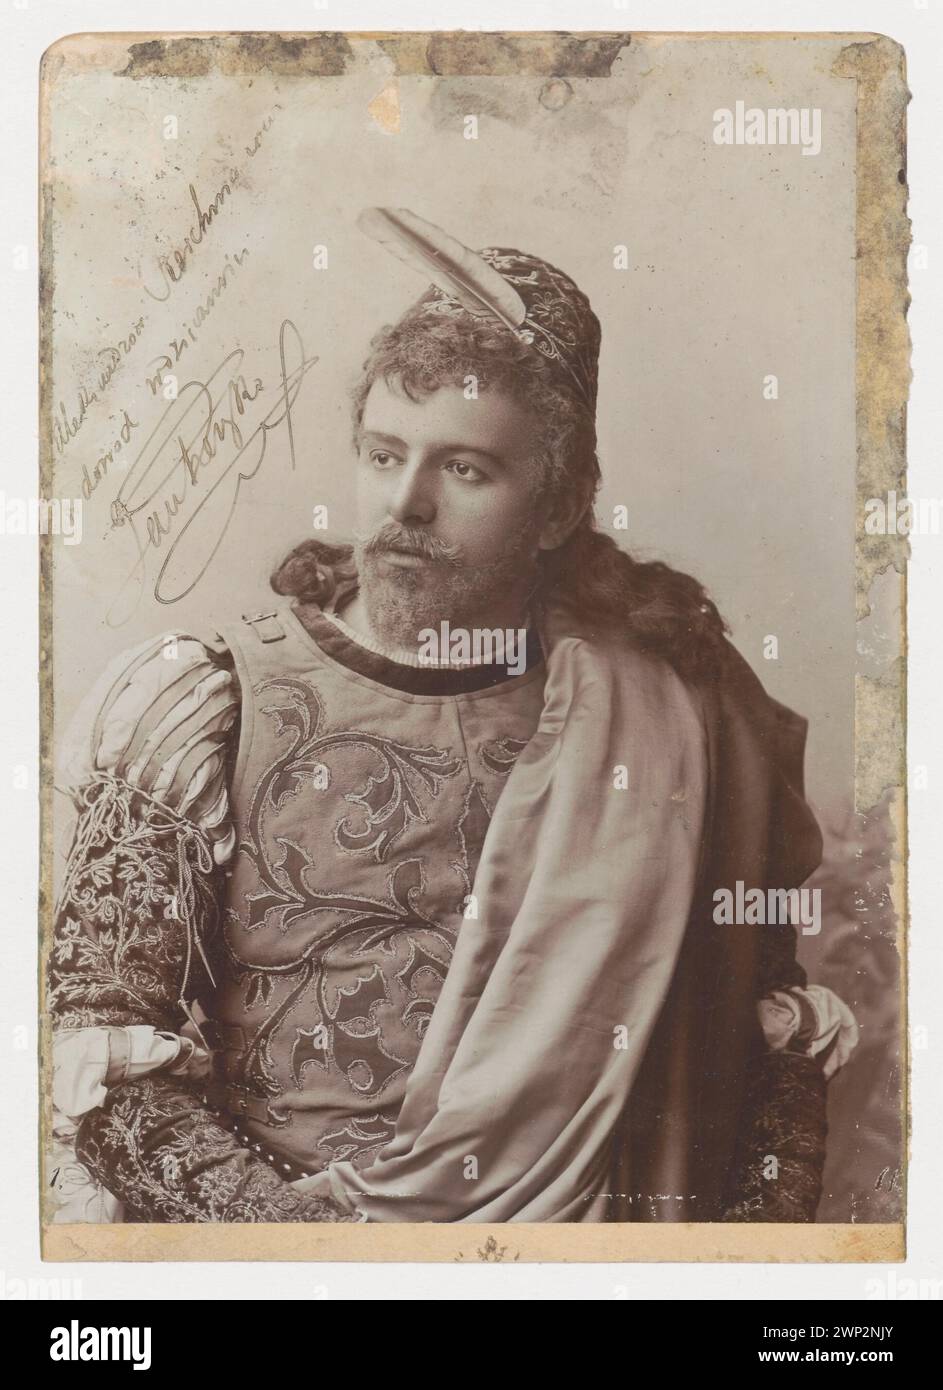 Portrait of Jan Reszke (1850-1925), BEAUTY, in the stage costume Romeo (later a character) from the opera 'Romeo and Julia' by Charles Gounod at the Grand Theater in Warsaw - photography with dedication for Aleksander Rajchman; Mieczkowski, Jan (Warsaw; photographic Zak 1893 (1893-00-00-1893-00-00);Gounod, Charles (1818-1893). Romeo and Julia, Rajchman, Aleksander (1855-1915), Rajchman, Aleksander (1855-1915)-dedication for, Rajchman, Aleksander (1855-1915)-collection, Reszke, Jan (1850-1925), Reszte, Jan (1850 -1925) -dedication from, Reszke, Jan (1850-1925) -iconography, Romeo Monteki (lit.) Stock Photo